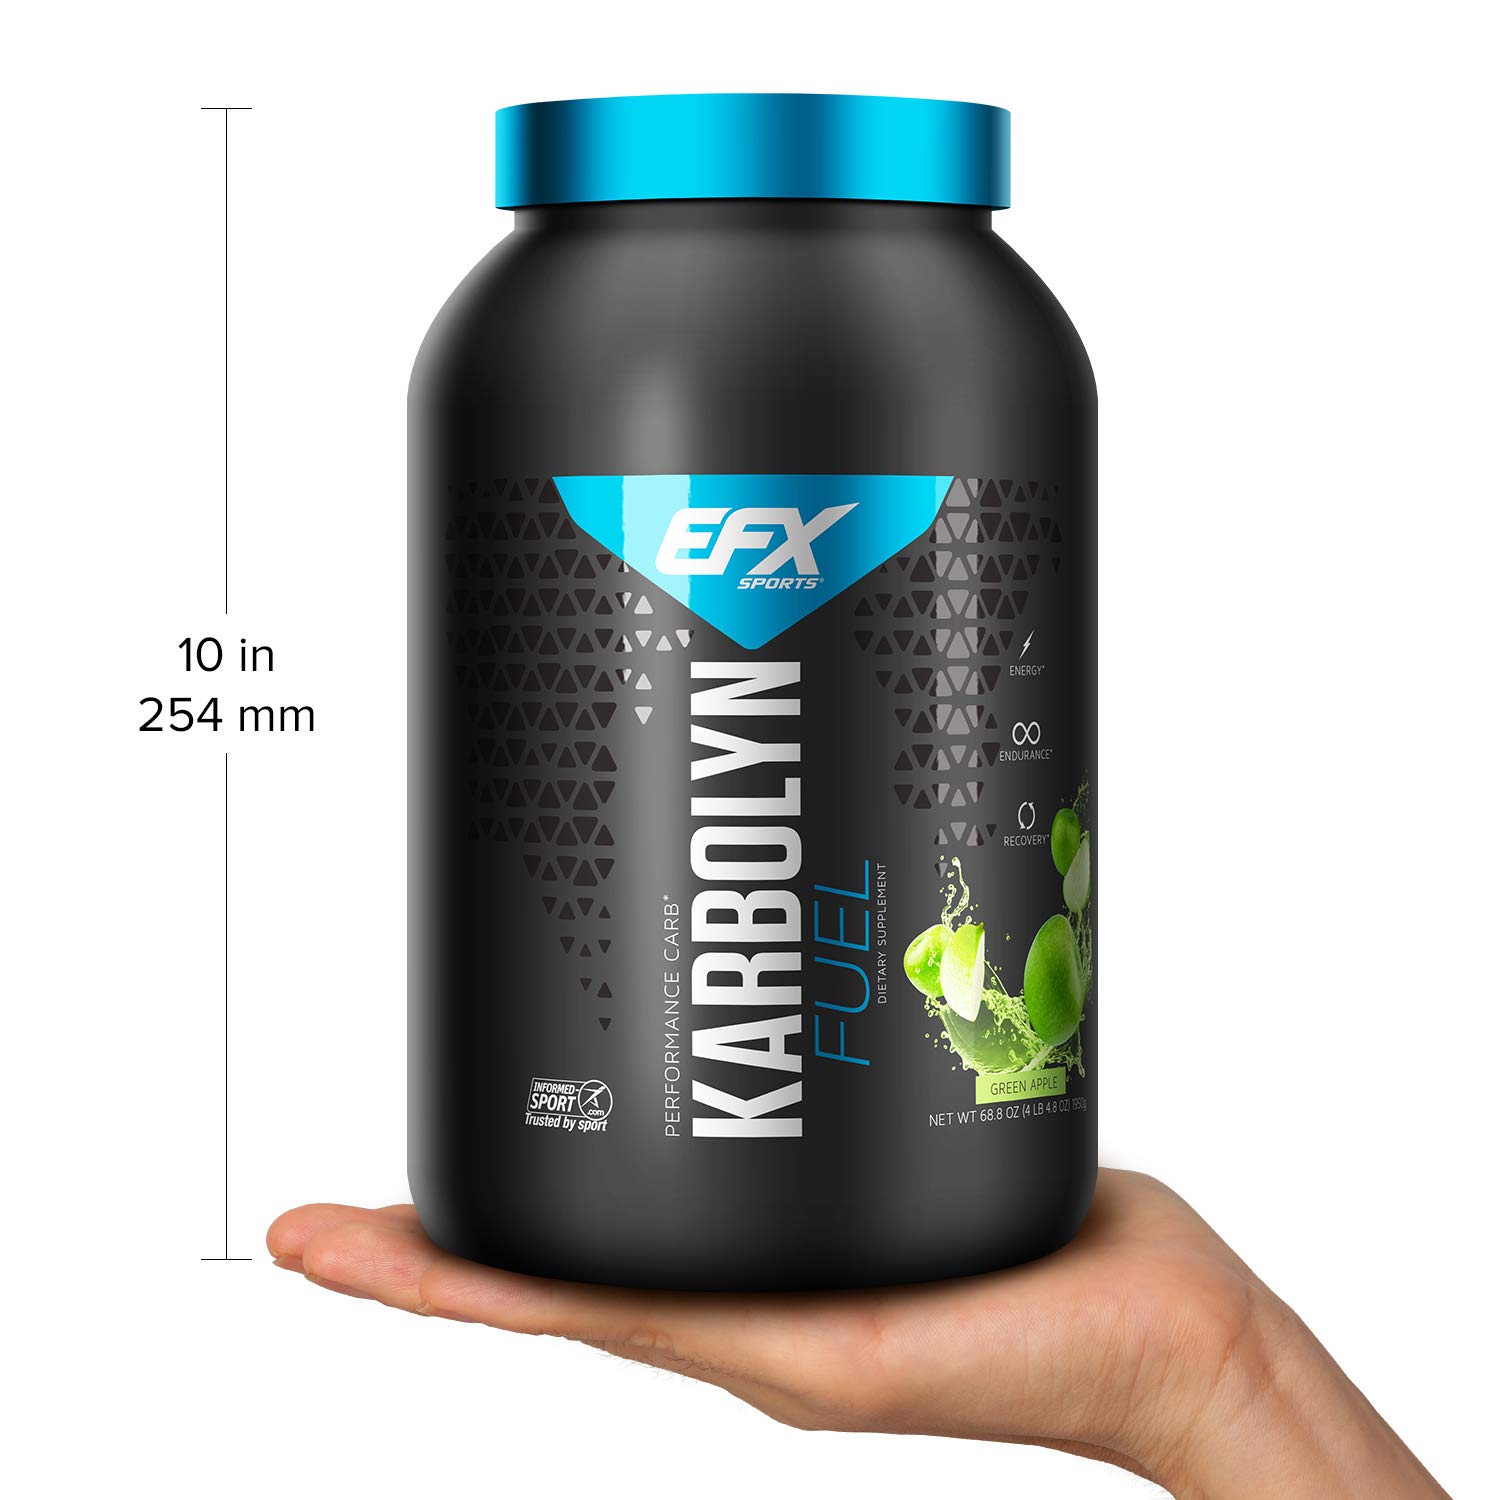 EFX Sports Karbolyn Fuel | Pre, Intra, Post Workout Carbohydrate Supplement Powder | Carb Load, Energize, Improve & Recover Faster | Easy to Mix | Green Apple (4 LB 4.8 OZ)